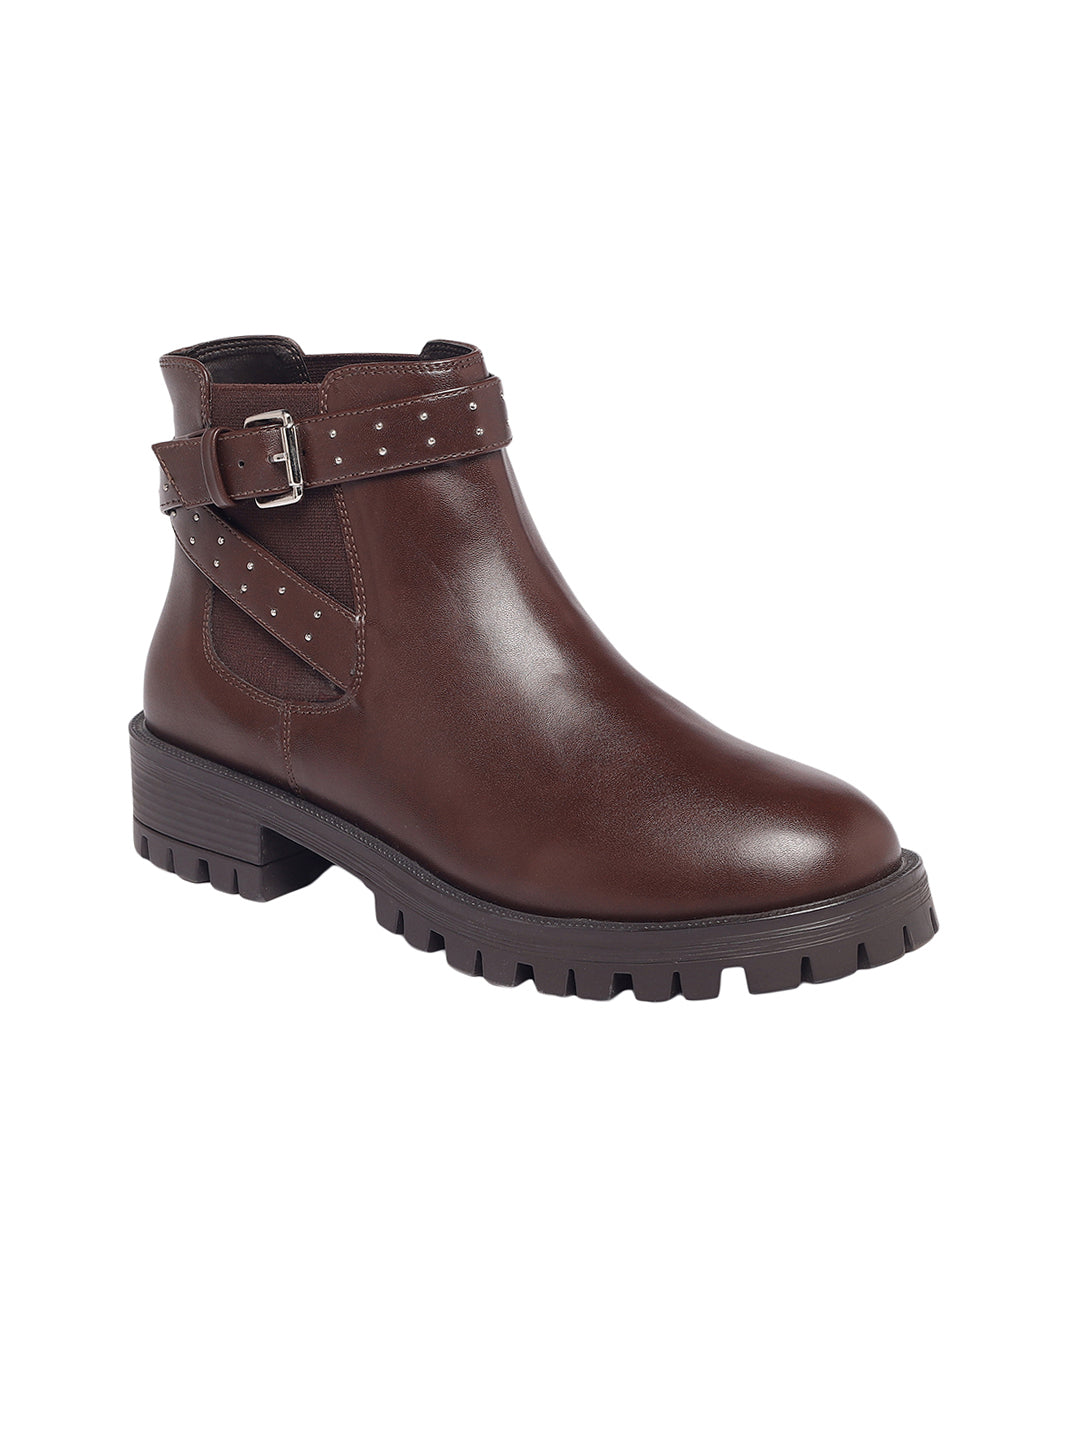 Cocoa Brown Boots